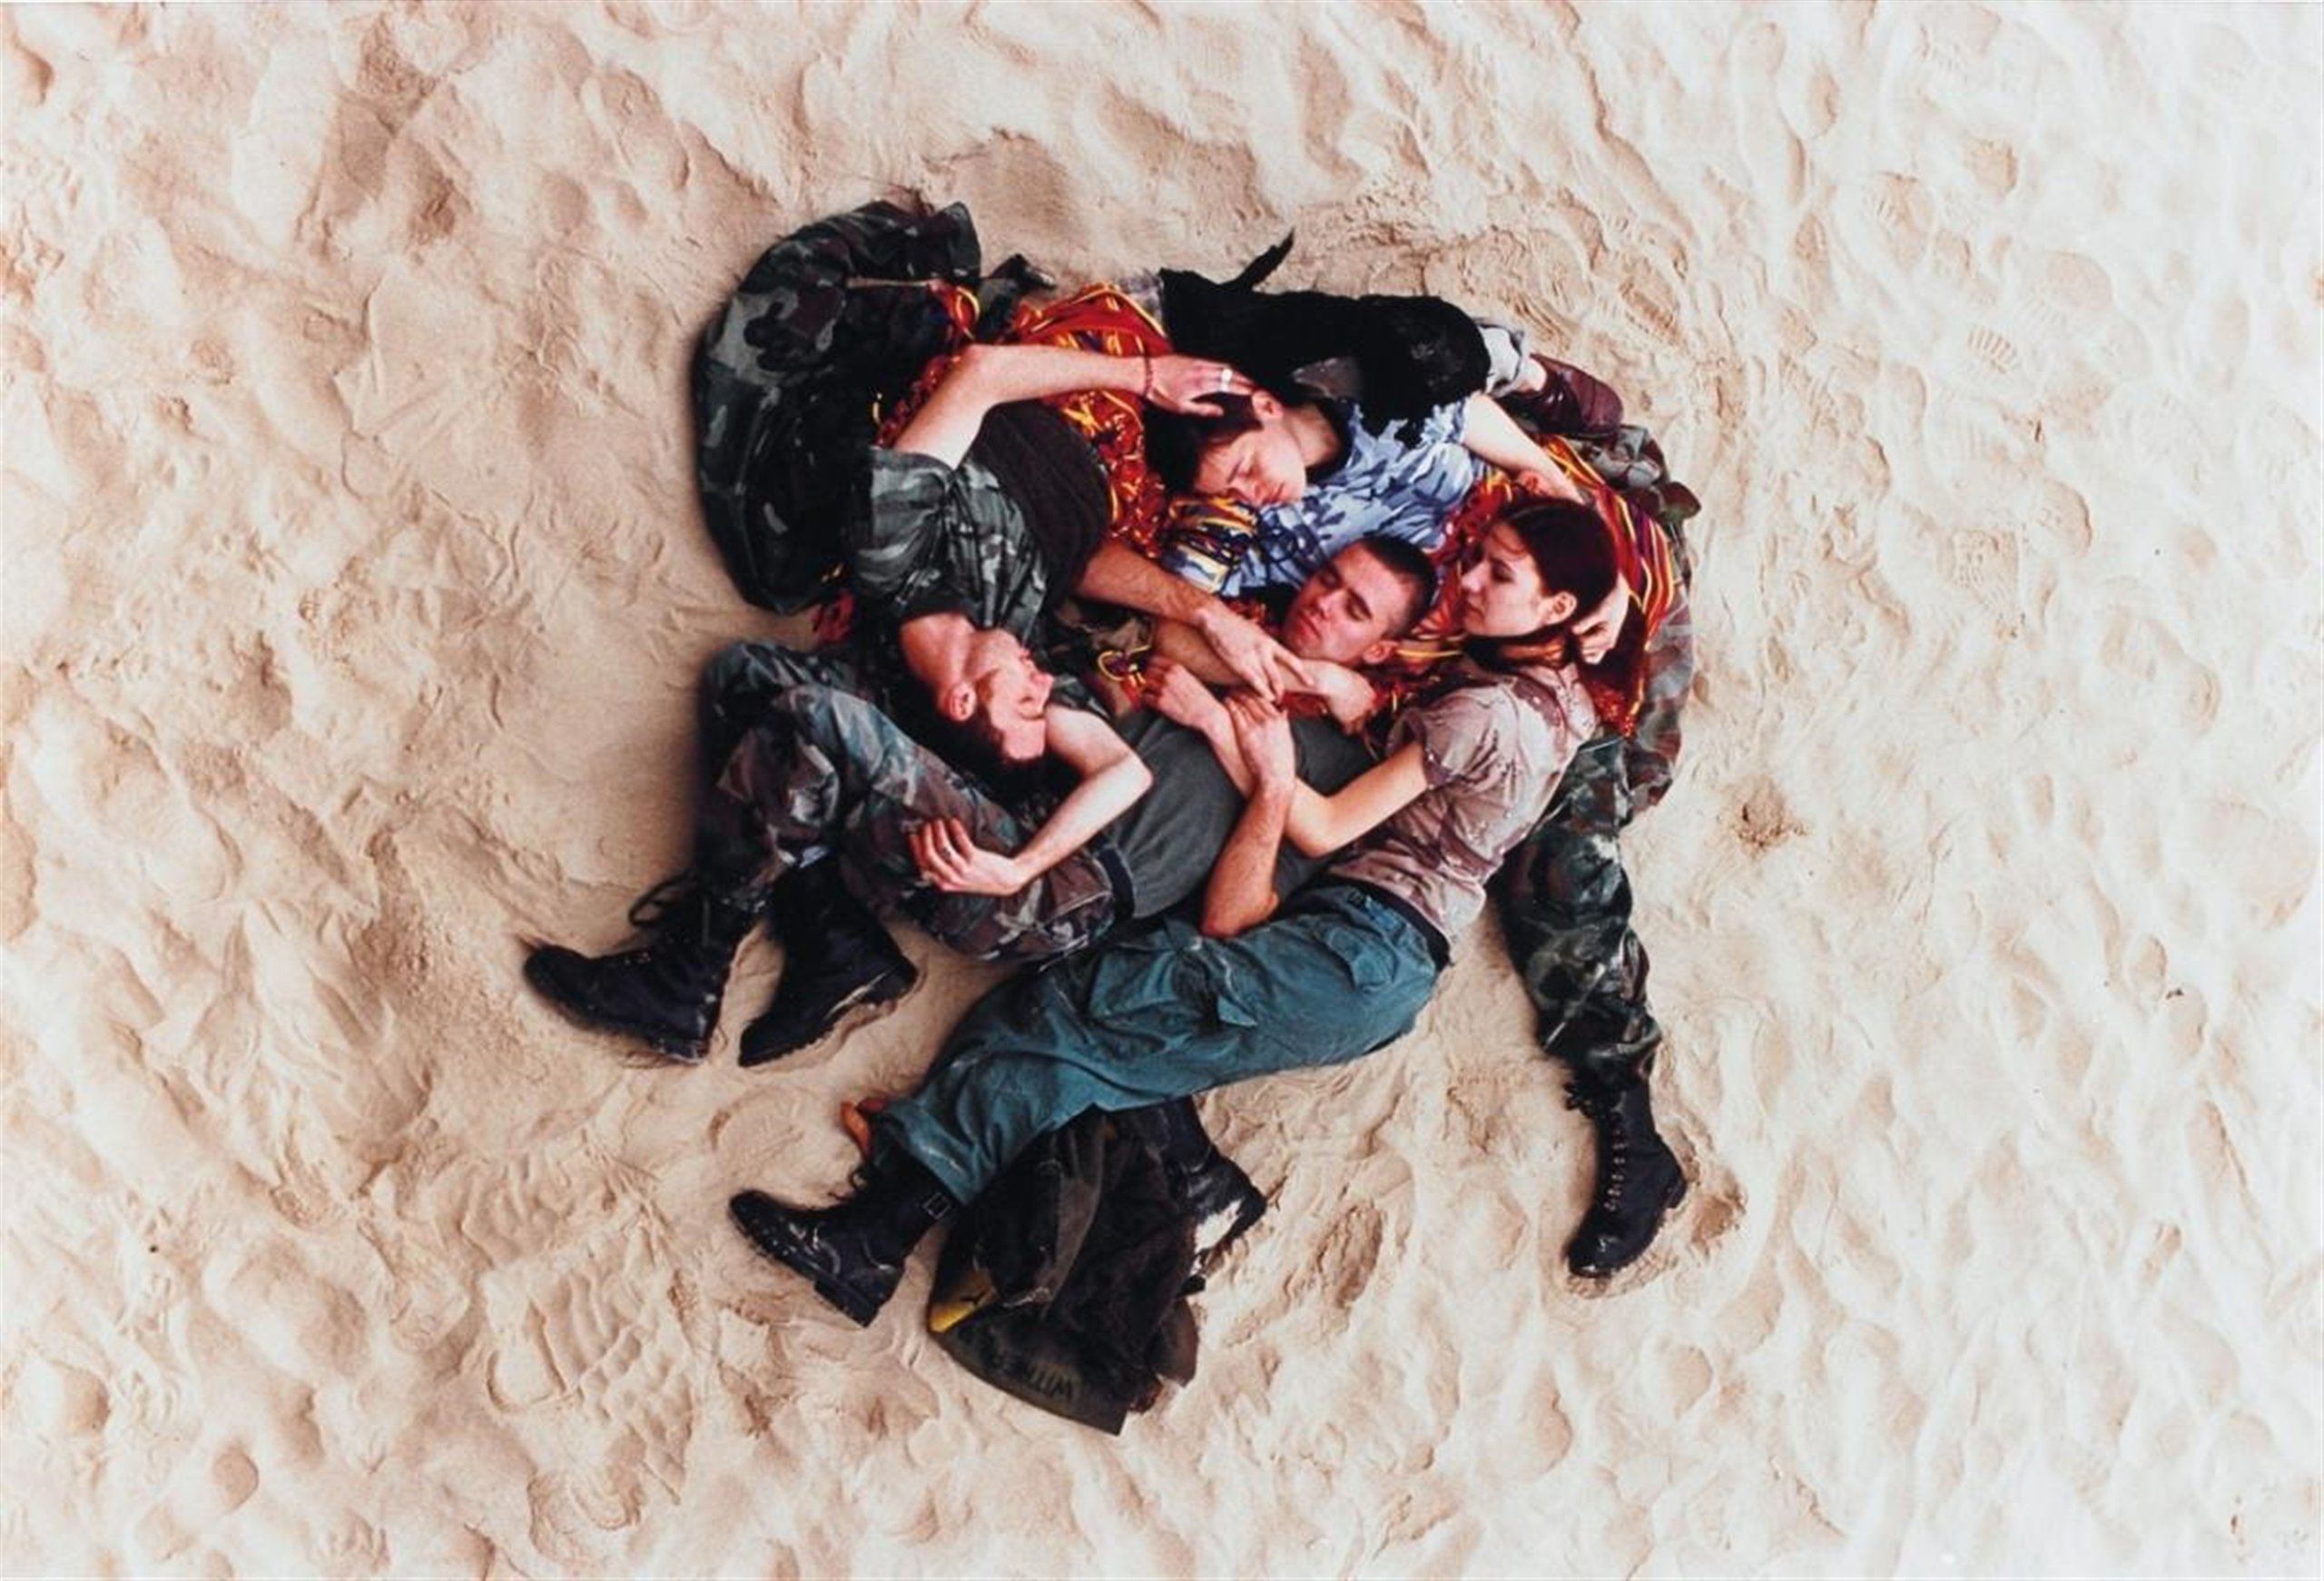 Lutz, Alex, Suzanne & Christoph on beach (1993) by Wolfgang Tillmans, currently on show at The Beguiling Siren is Thy Crest